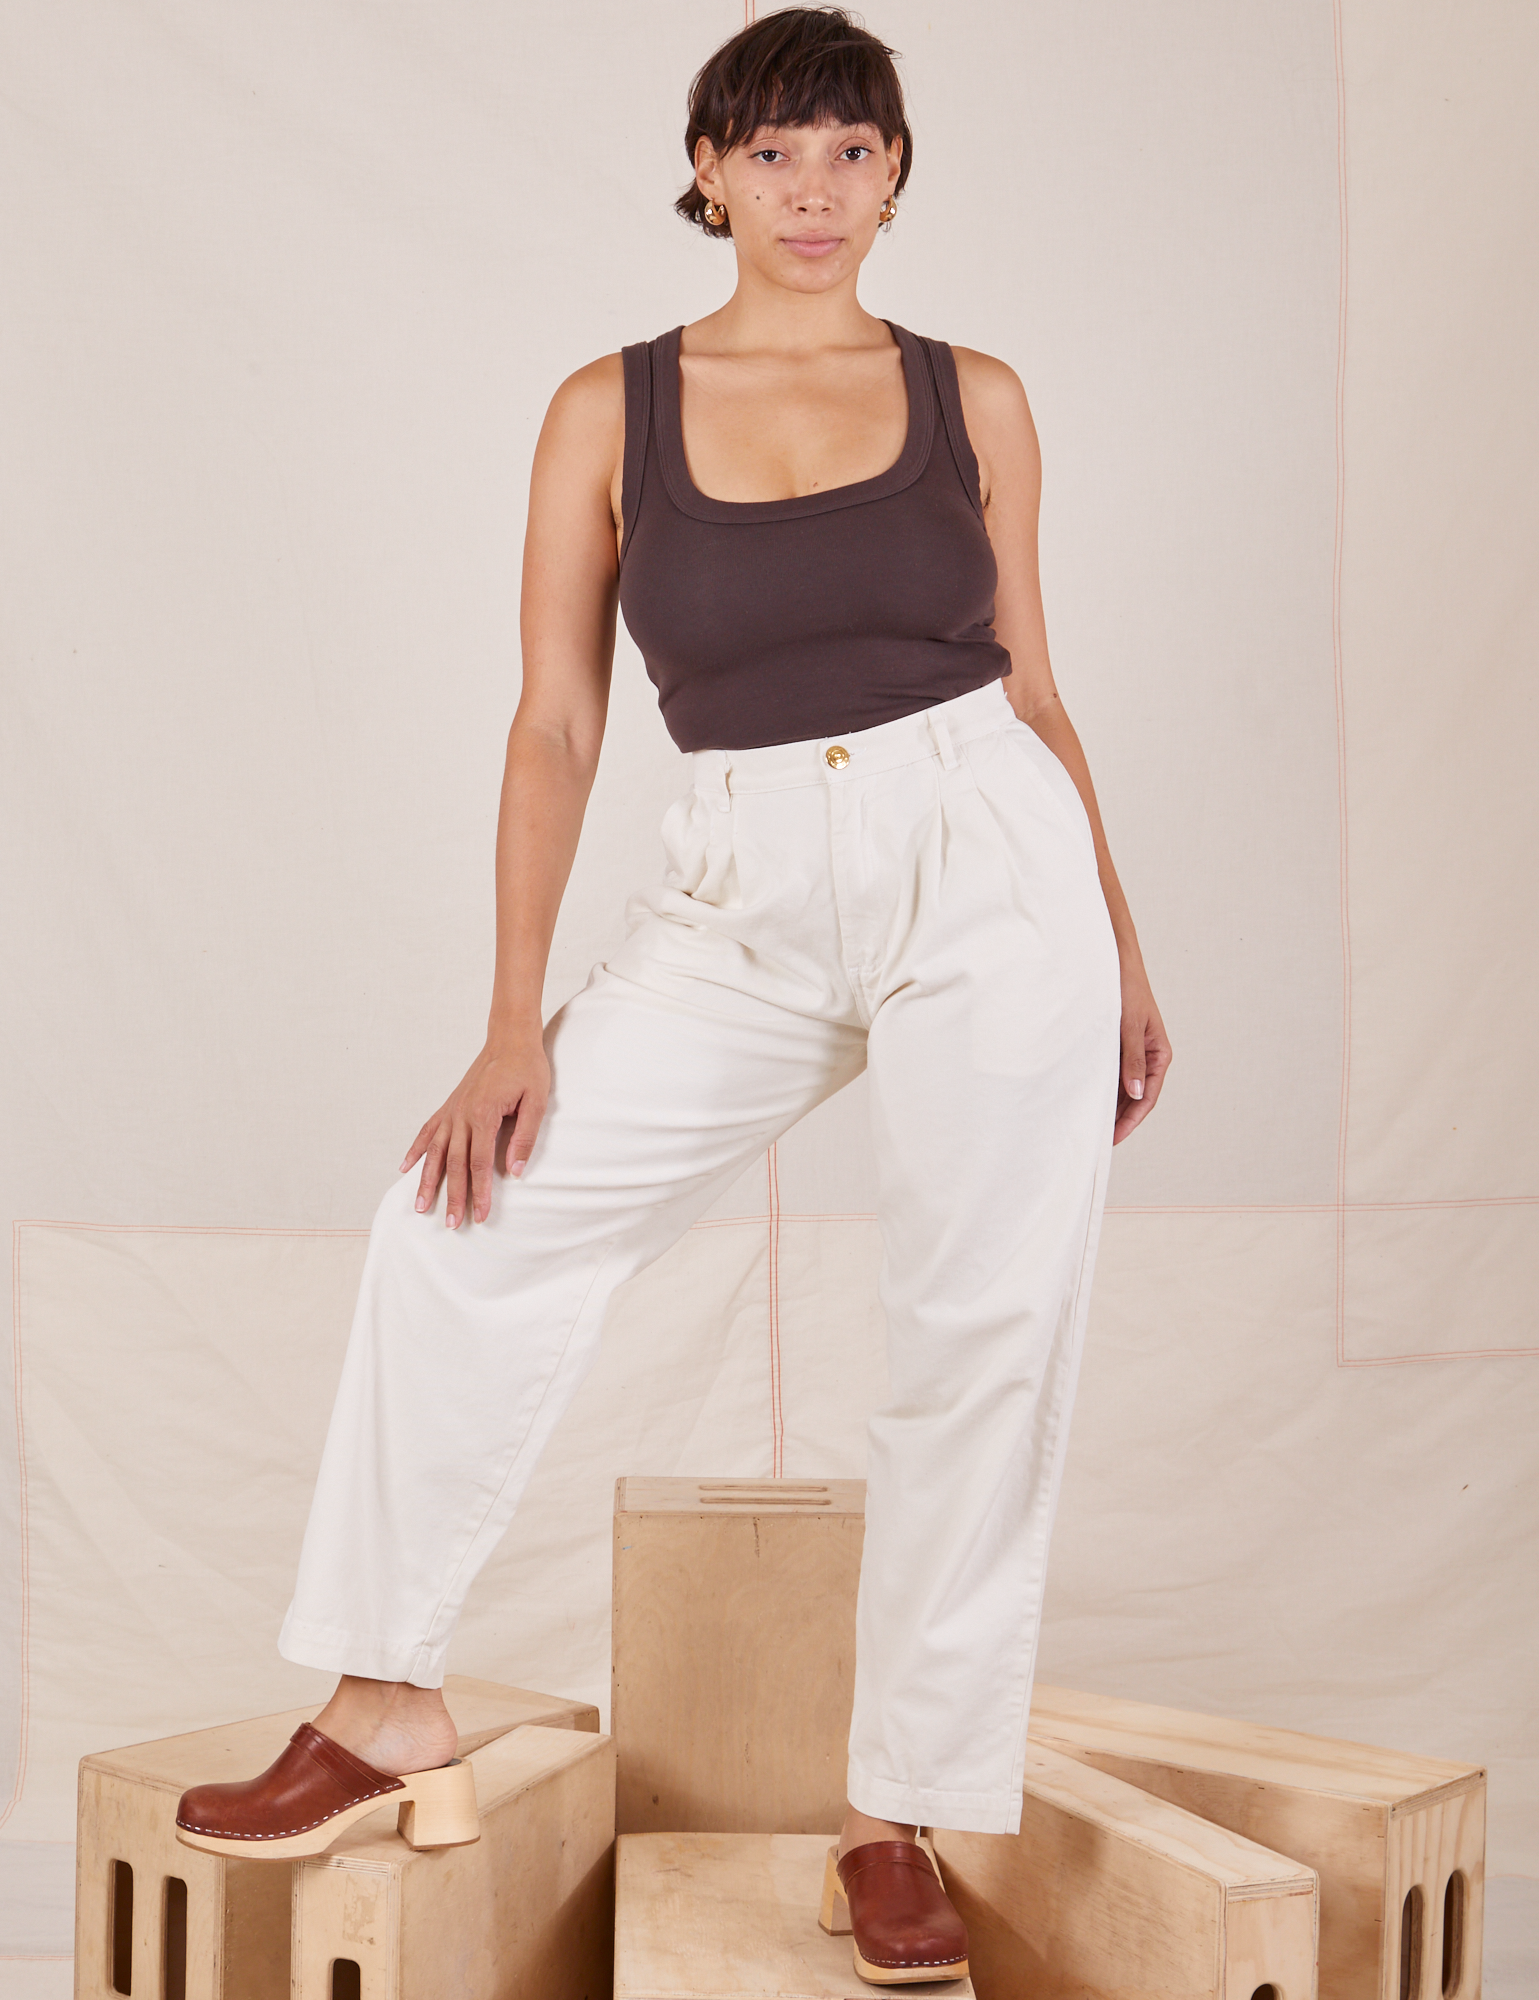 Tiara is 5&#39;4&quot; and wearing S Heavyweight Trousers in Vintage Off-White paired with espresso brown Cropped Tank Top.